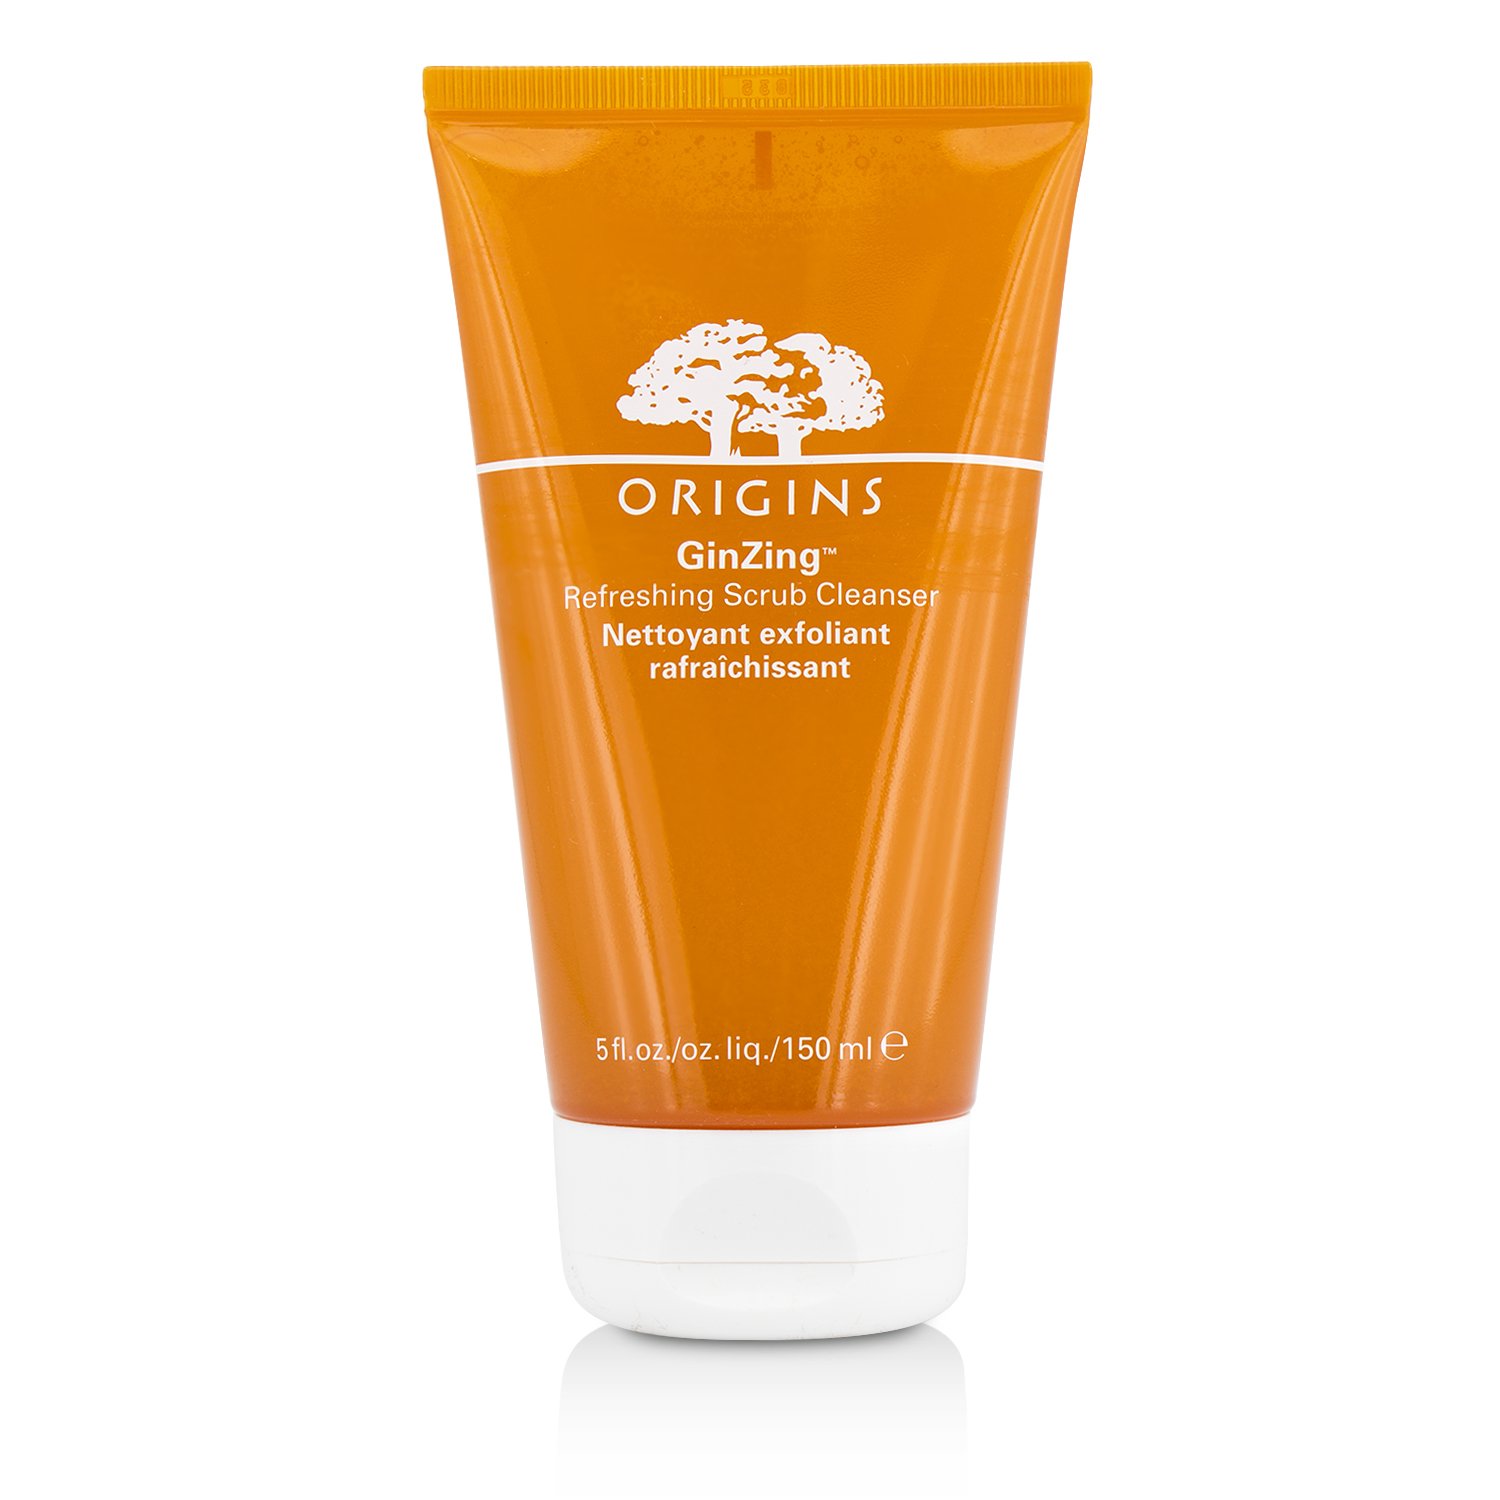 Photos - Facial / Body Cleansing Product Origins GinZing Refreshing Scrub Cleanser